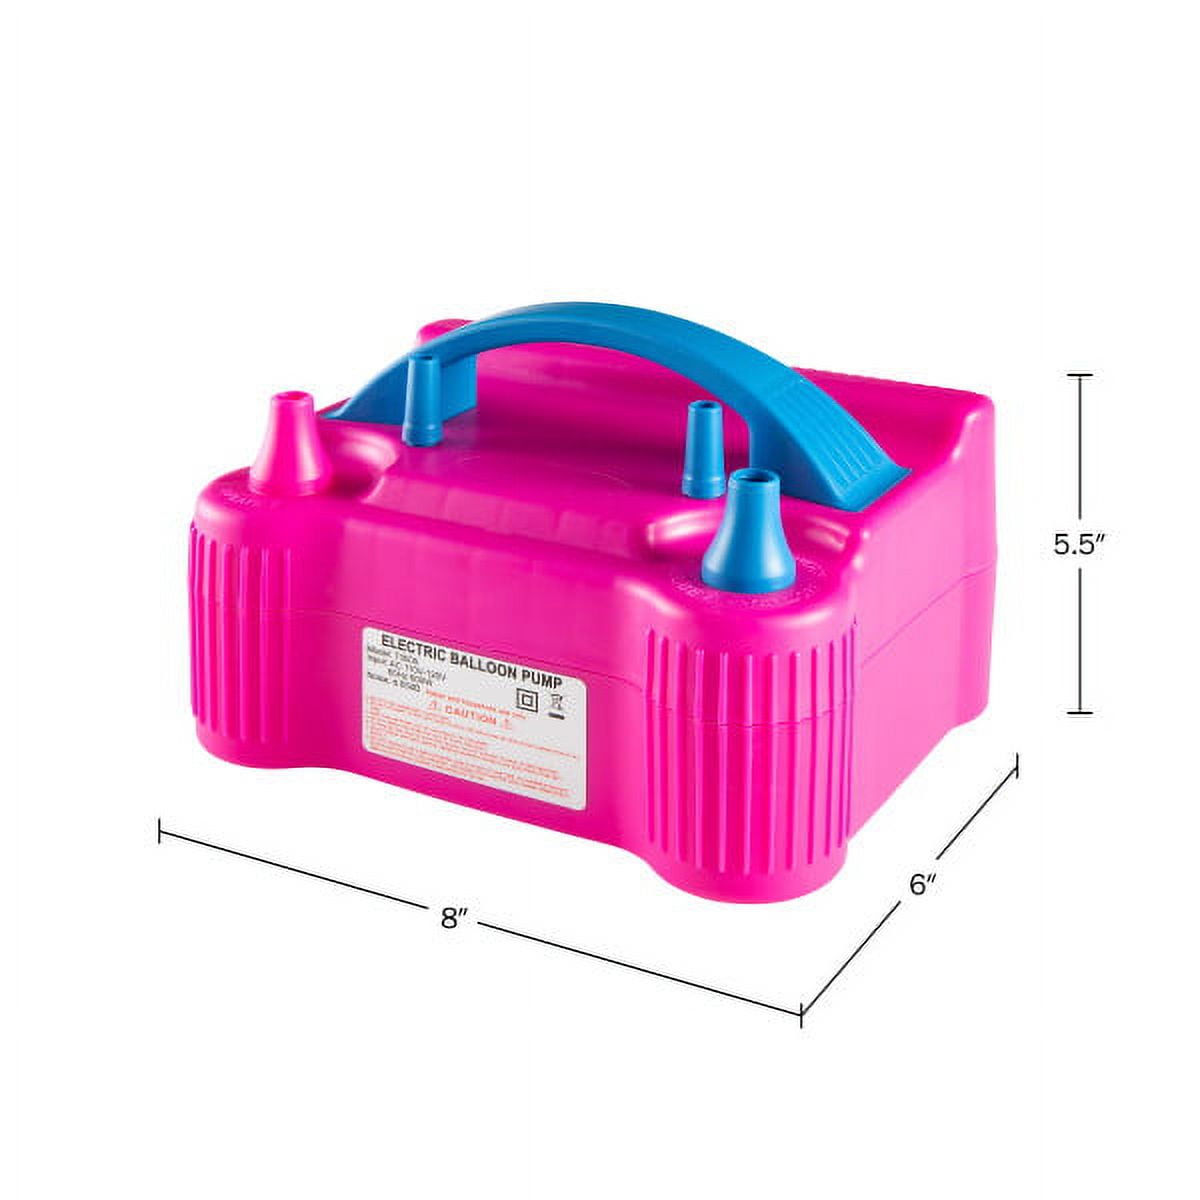 Electric Balloon Pump – Inflates Balloons in 3 Seconds – Lightweight and  Portable Balloon Inflator - Pink and Blue